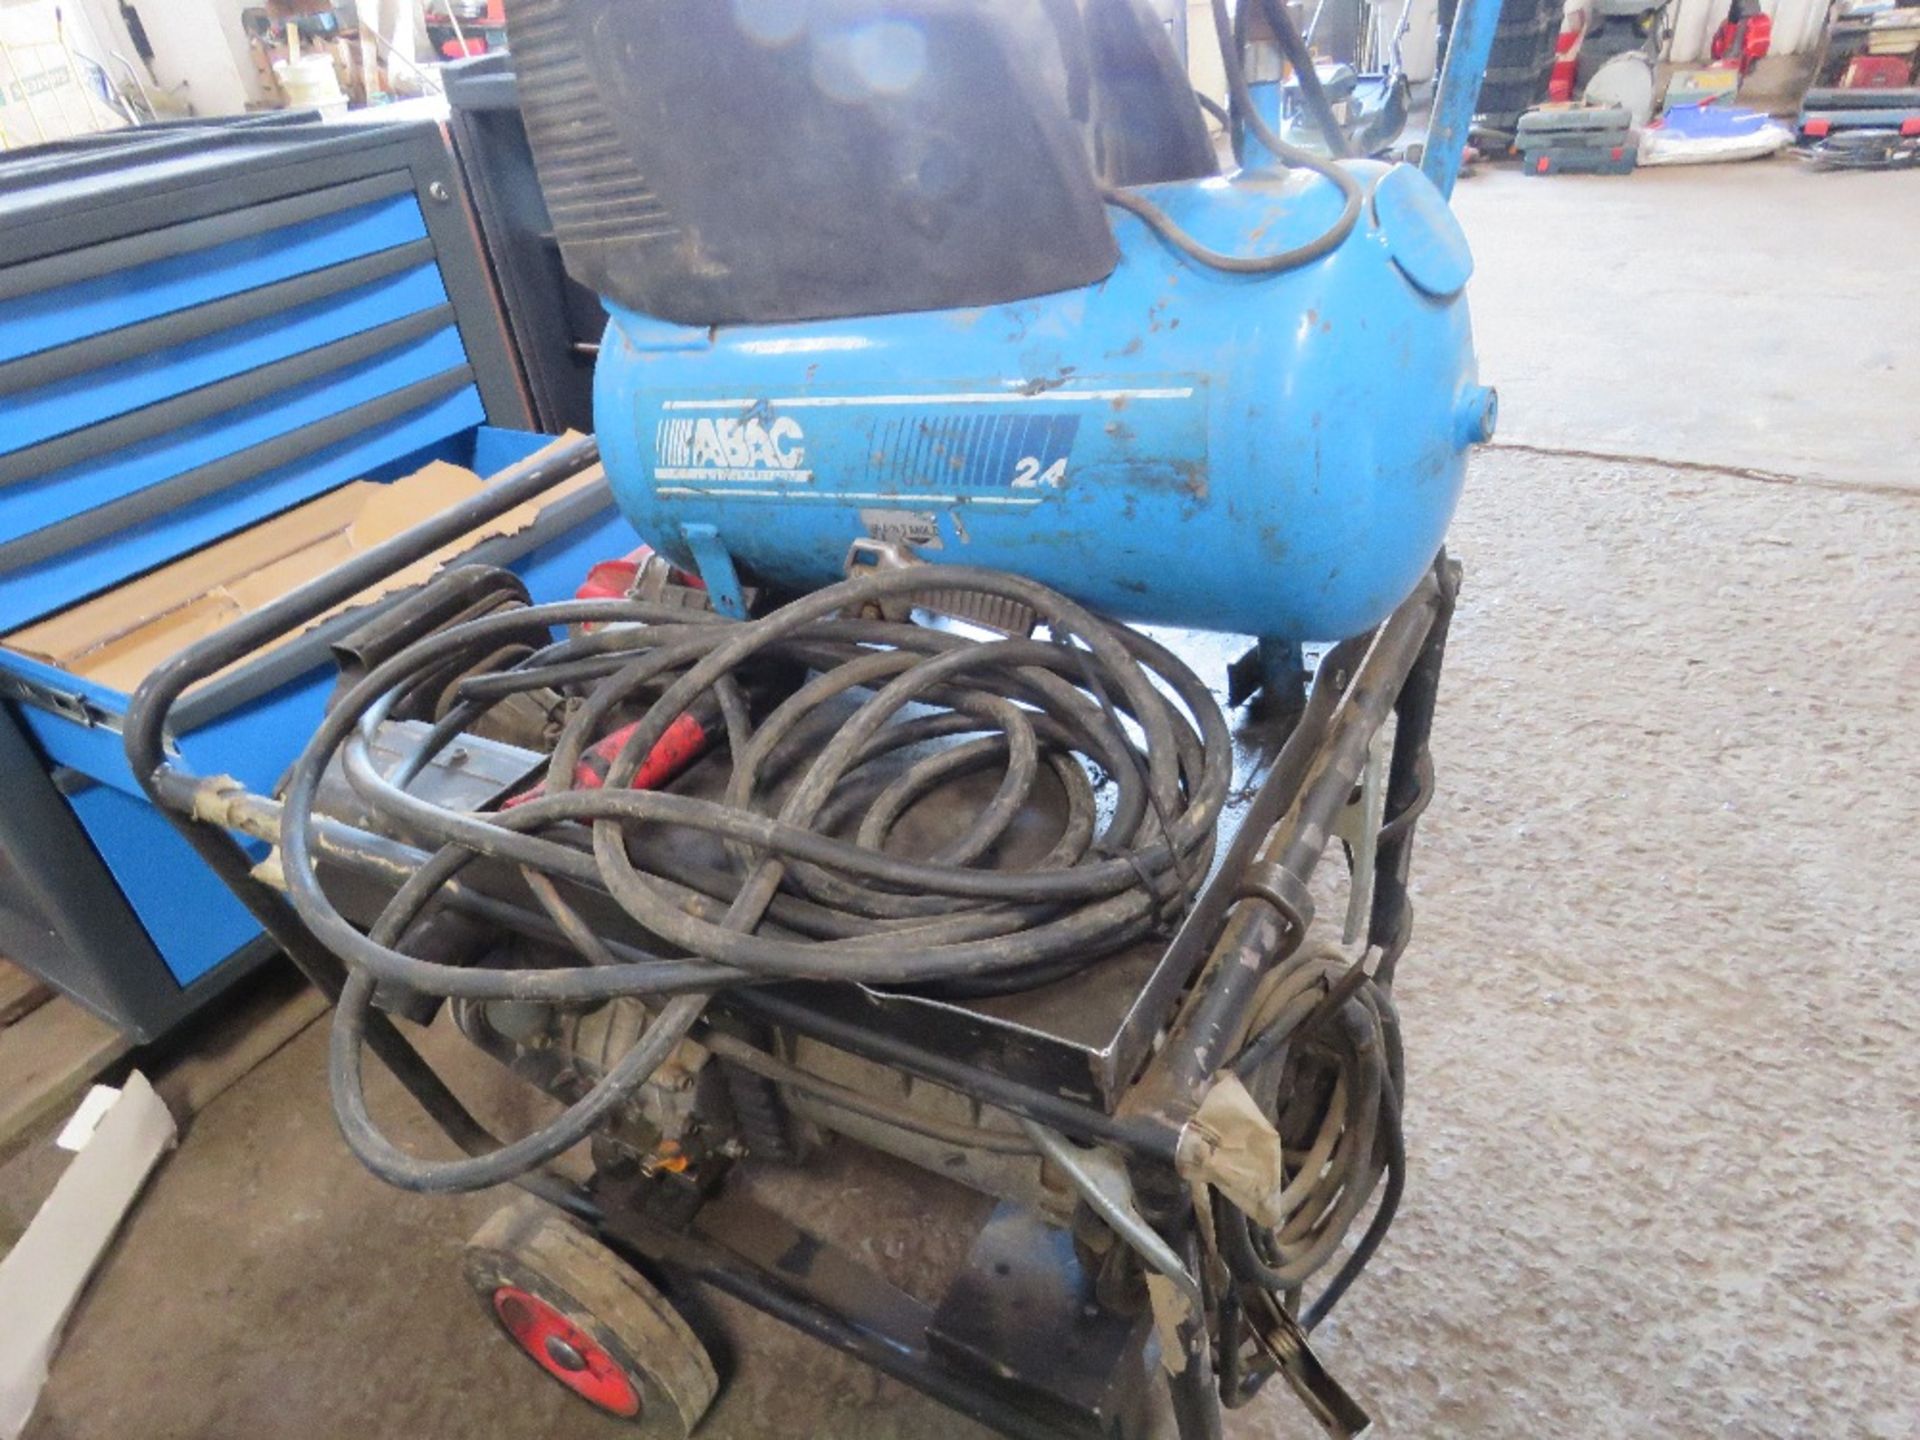 YANMAR DIESEL ENGINED WELDER GENERATOR WITH LEADS AND A SMALL COMPRESSOR FITTED. - Image 3 of 4